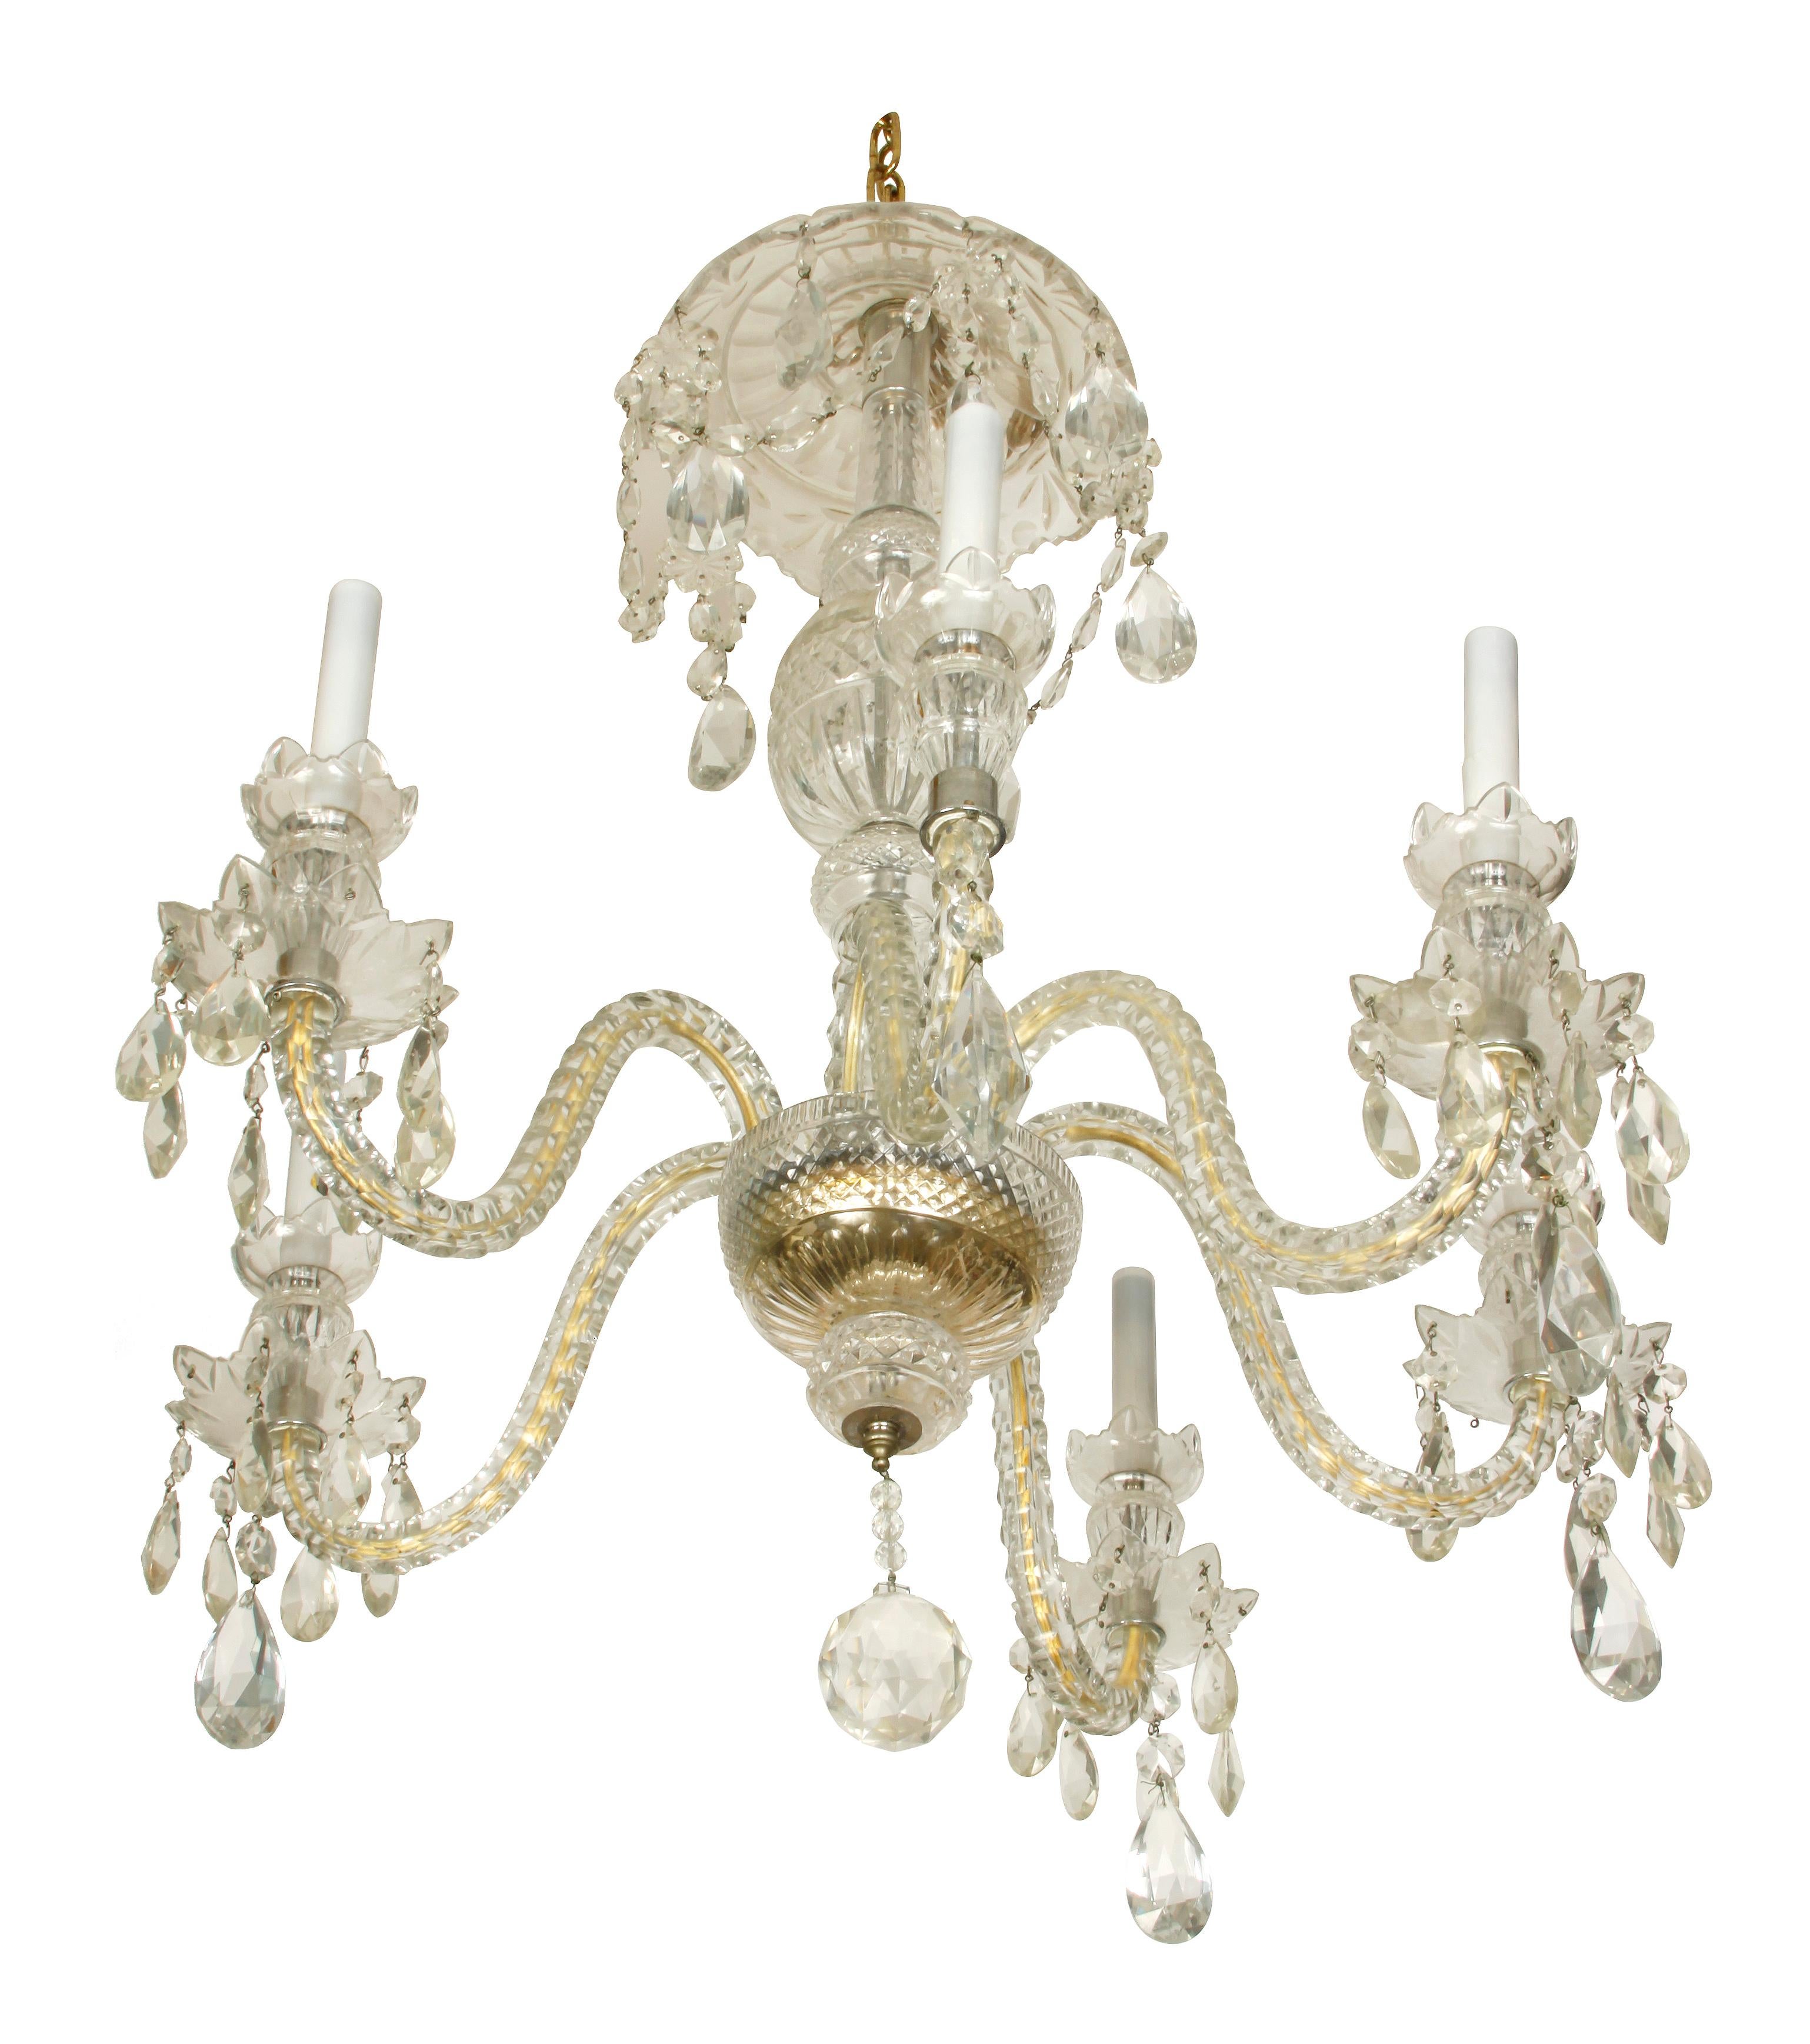 Winston crystal chandelier, circa 1940s, cut glass bead rope and tear drop prisms.